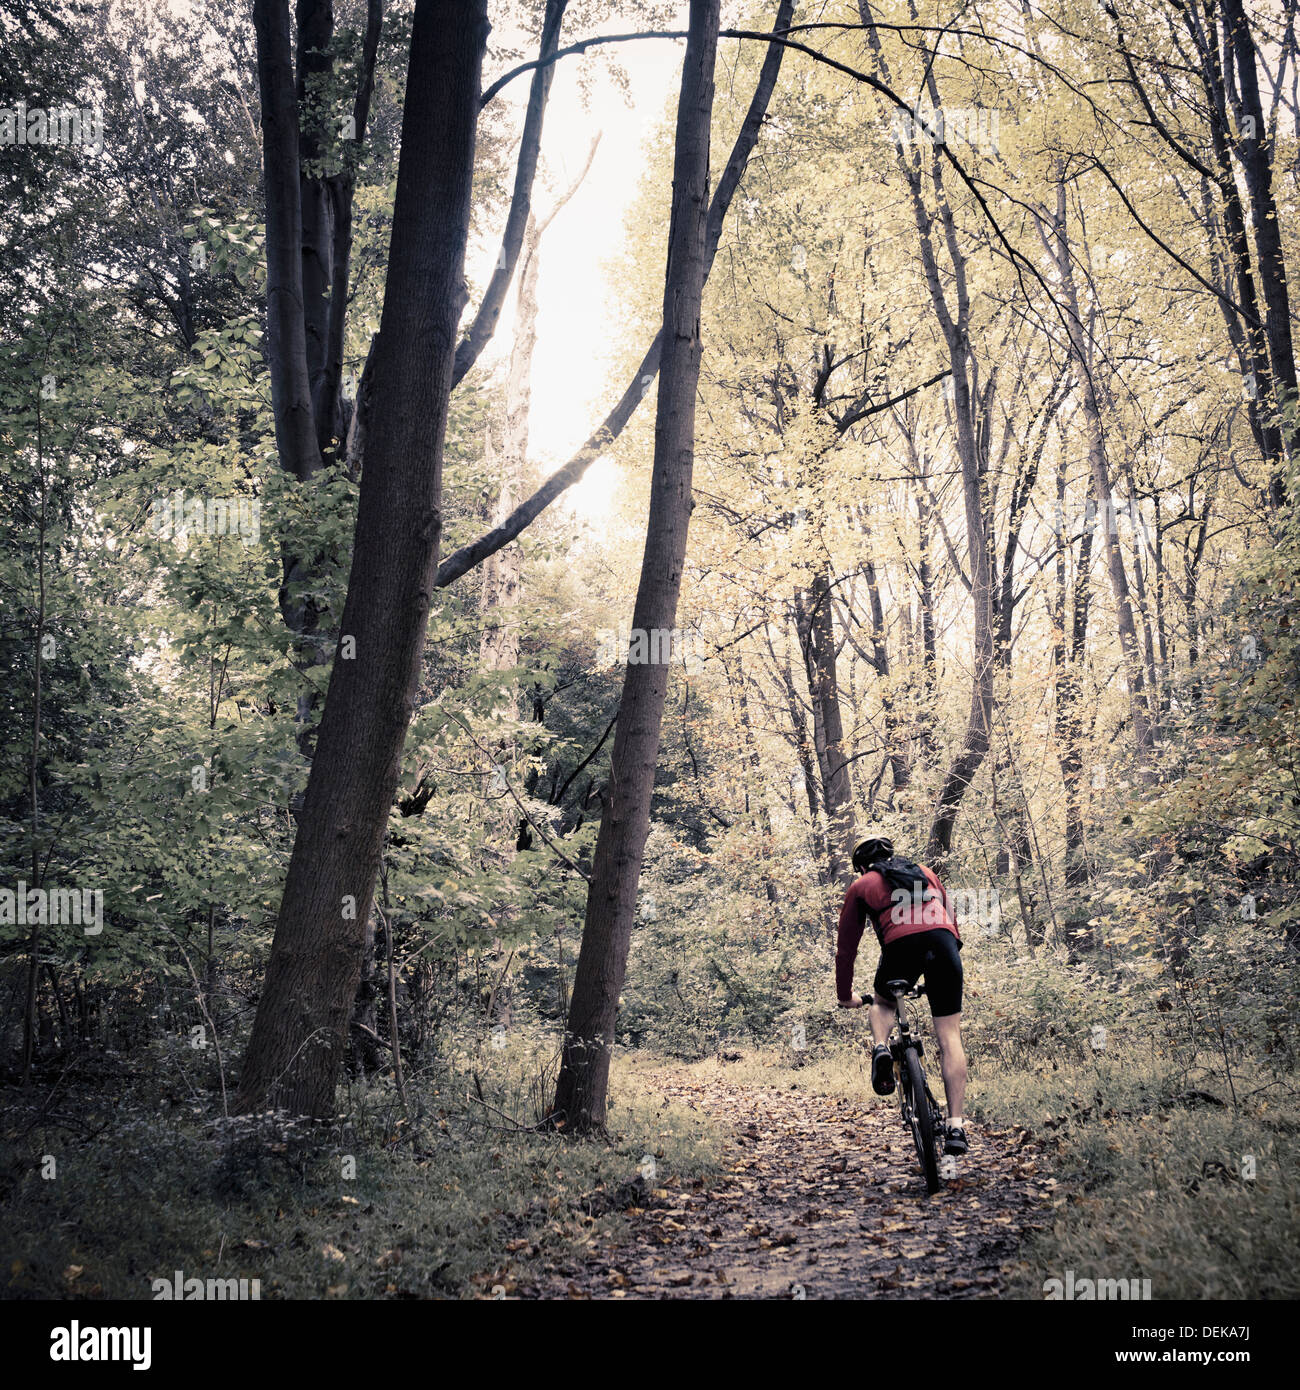 Caucasian man riding mountain bike in forest Banque D'Images